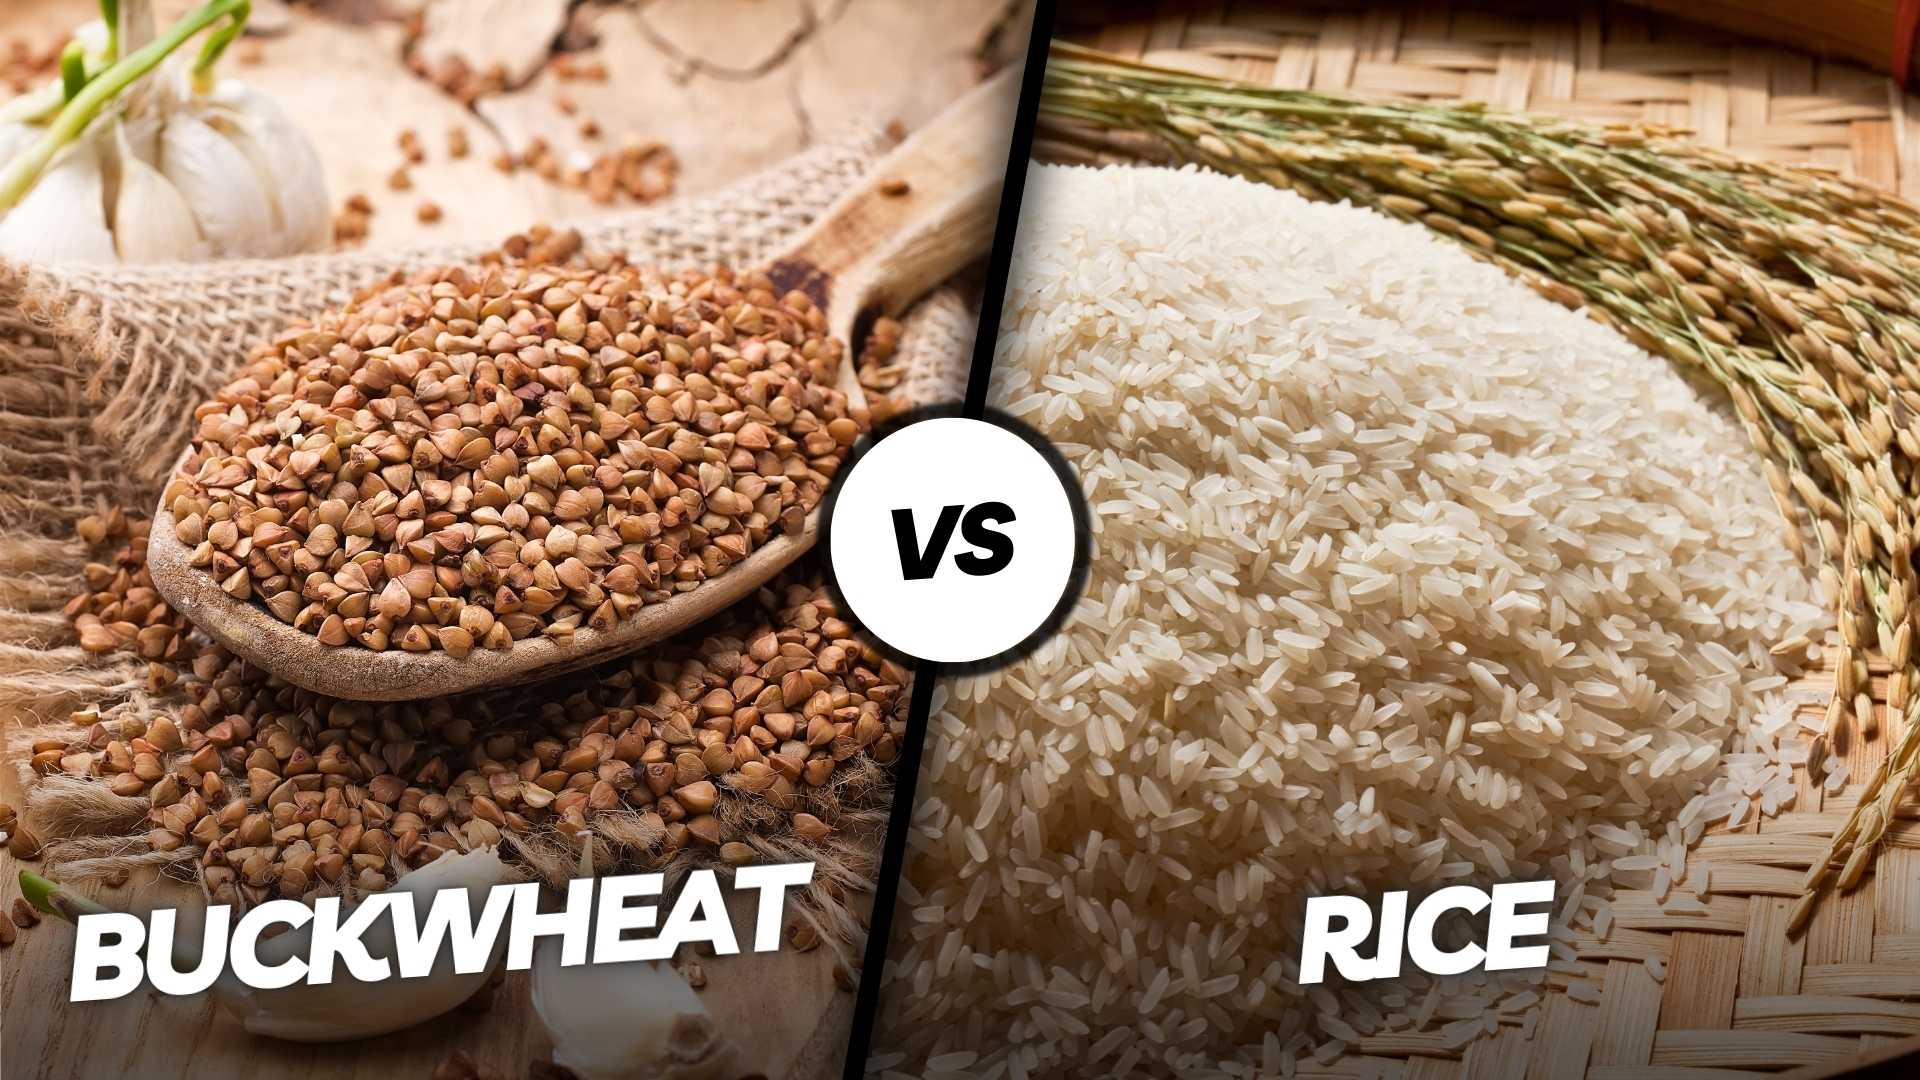 Buckwheat vs Rice: Which is the Healthier Grain for Your Diet?